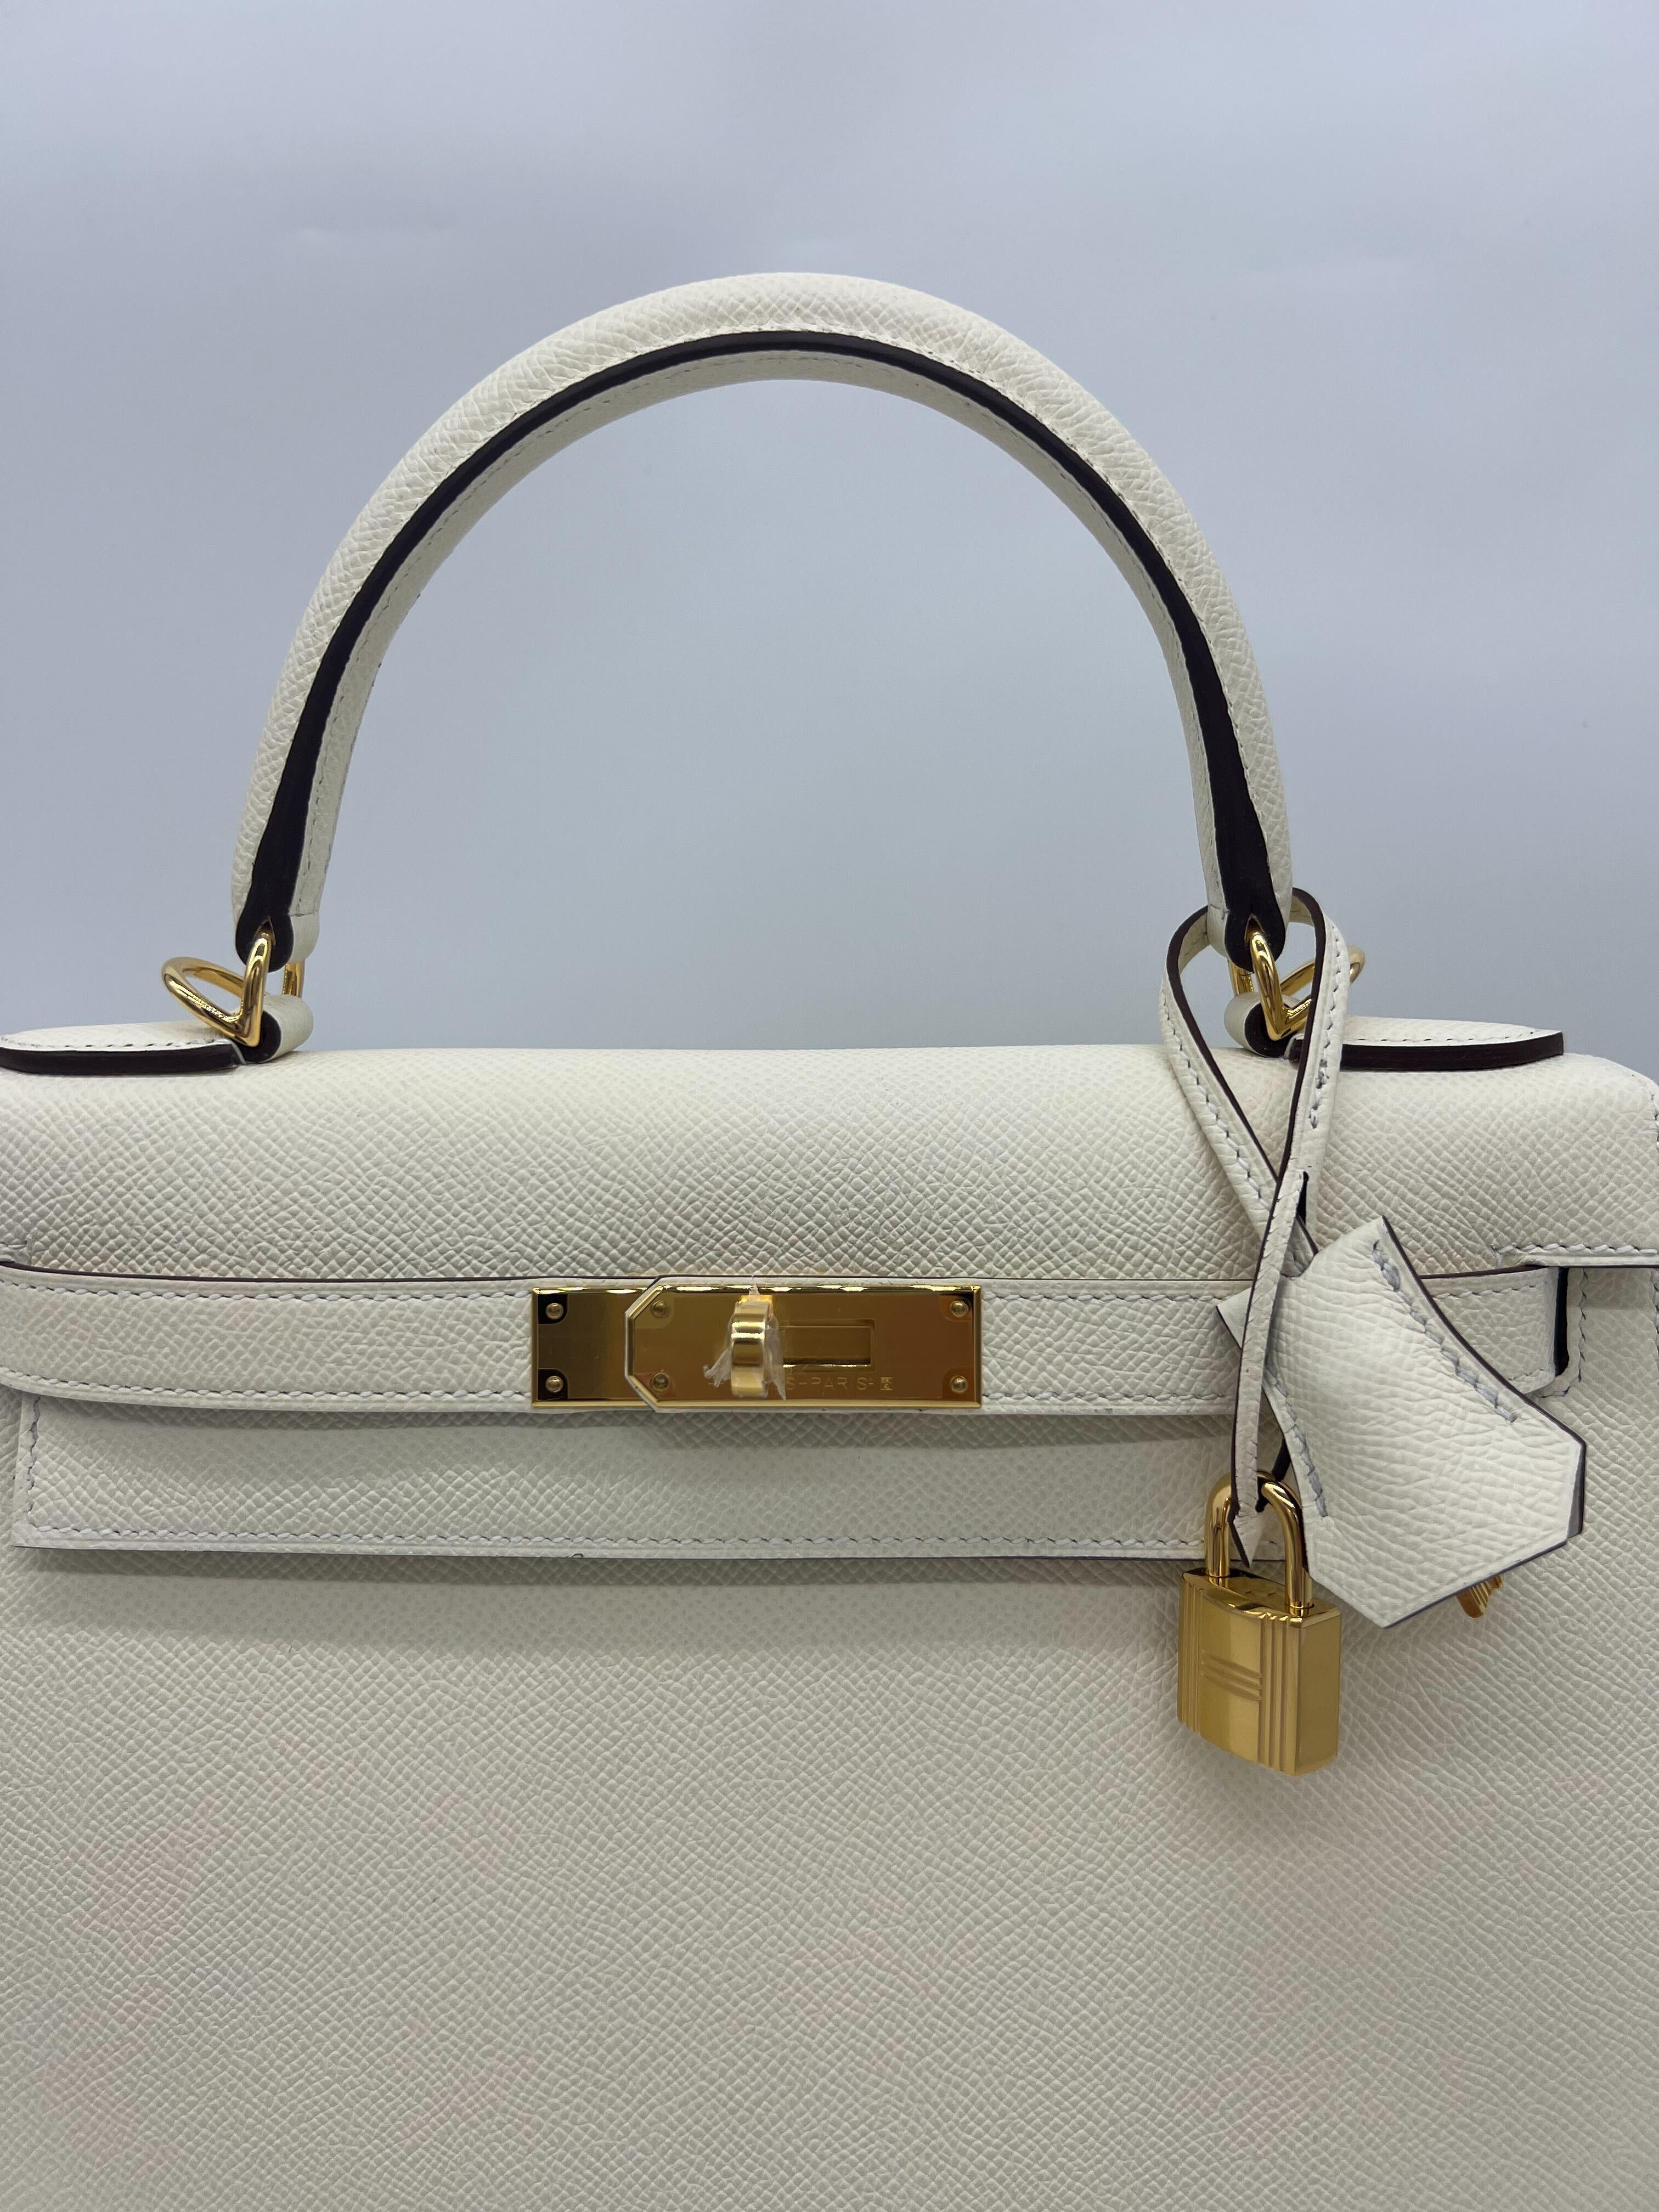 Hermes Kelly 28 Nata Epsom Gold Hardware In New Condition For Sale In New York, NY